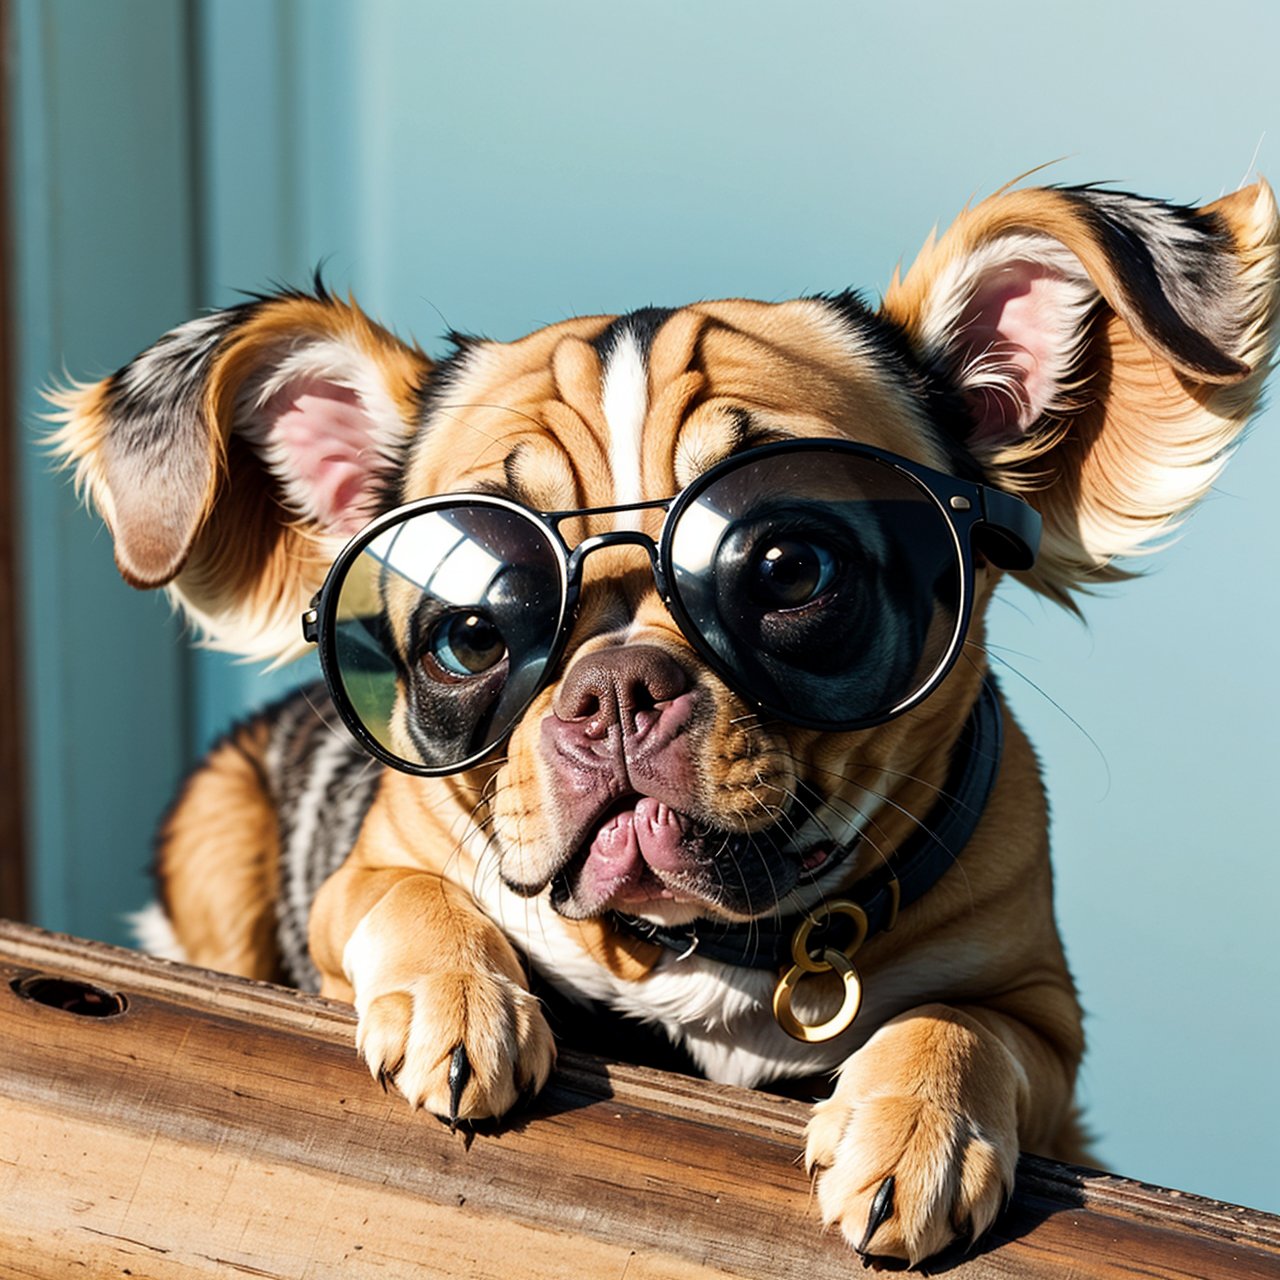 cute little　a Dog　sunglasses on　Has a small　Pop　charicature
